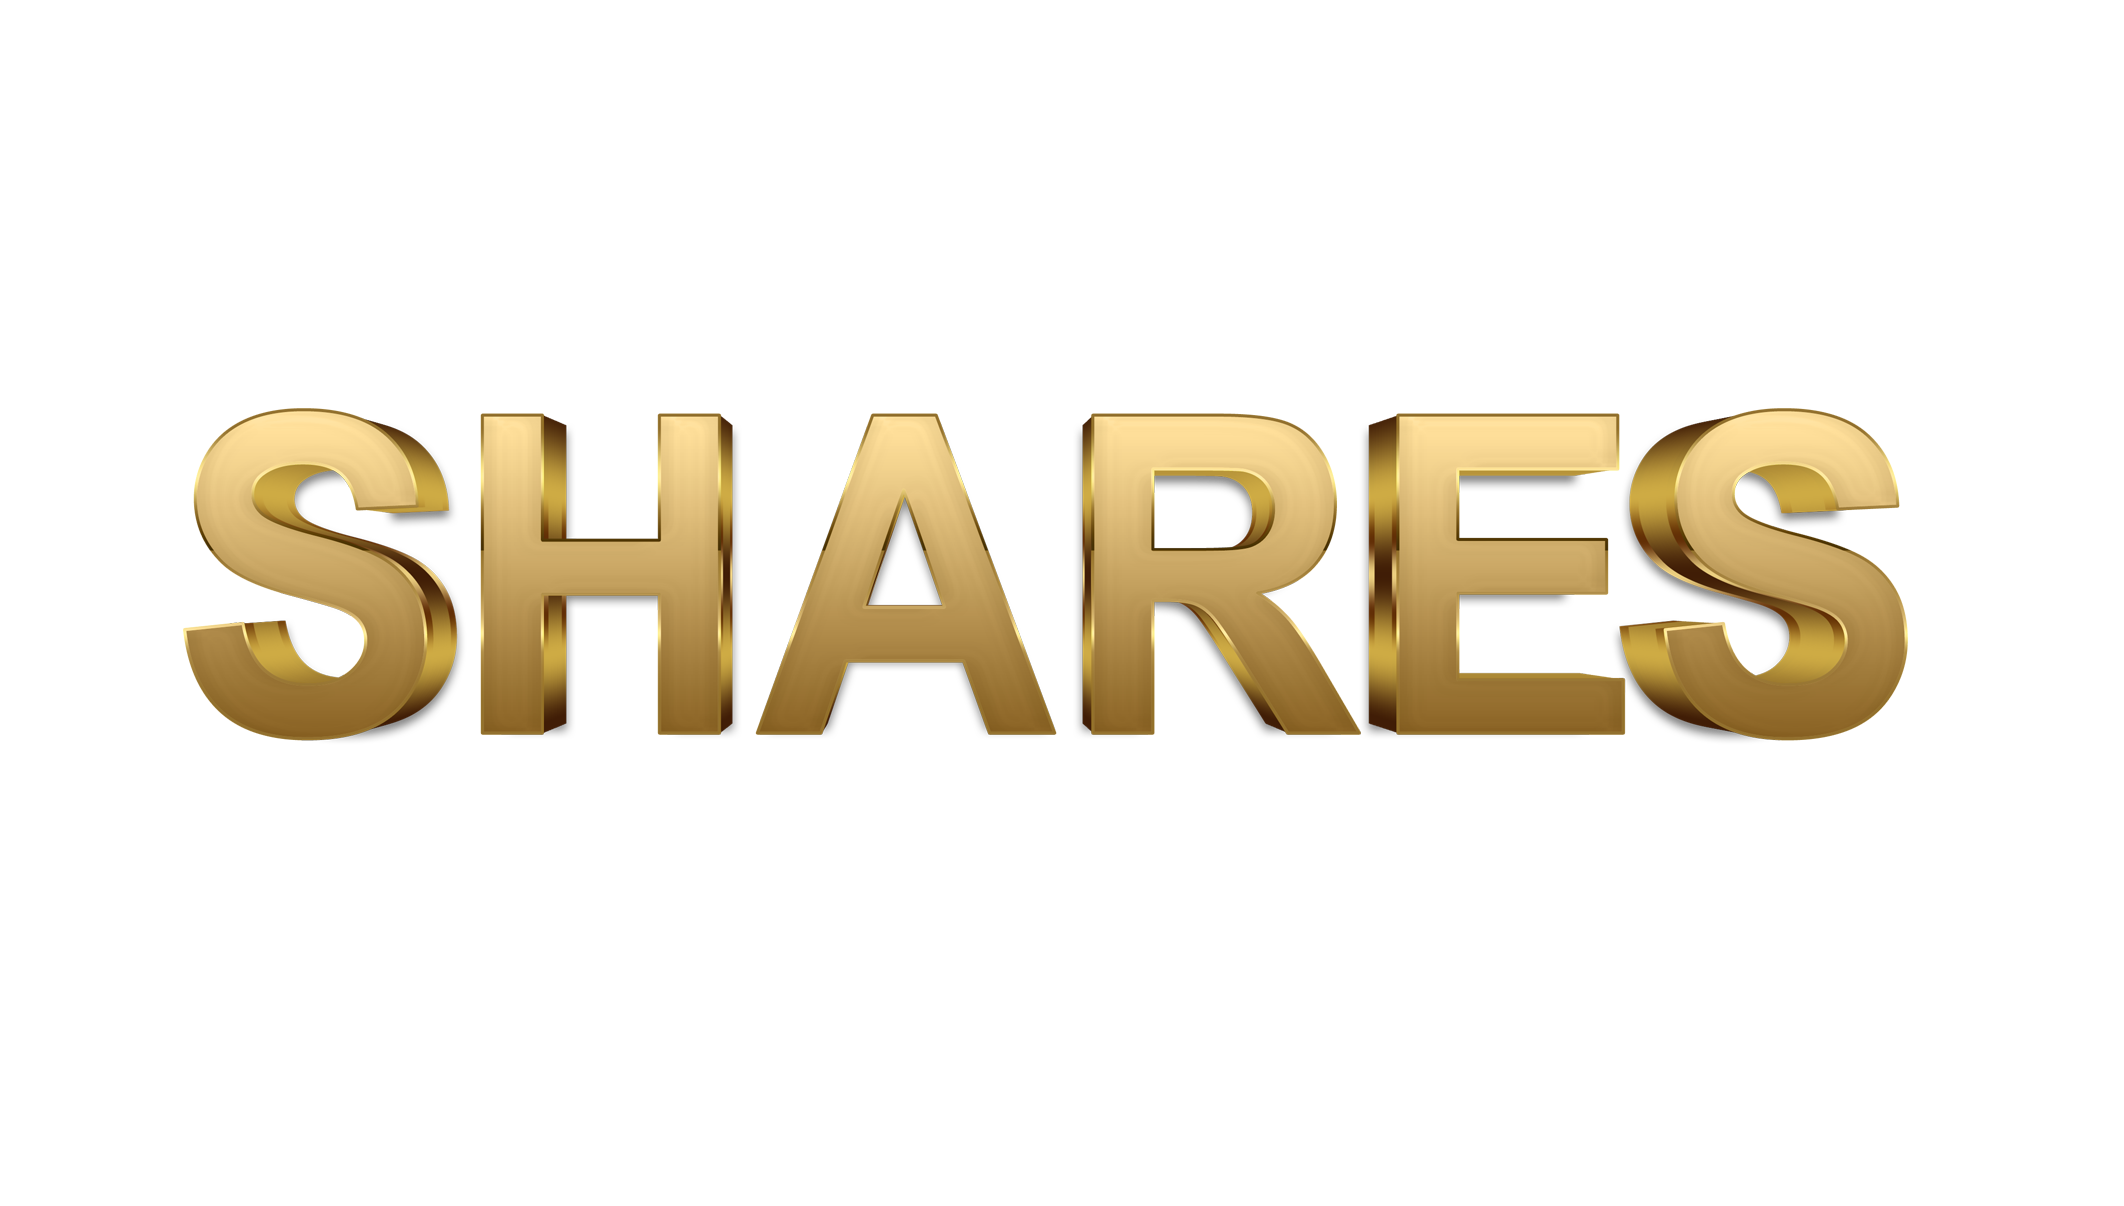 Shares word png, Shares png, word Shares gold text typography PNG images Shares png transparent background